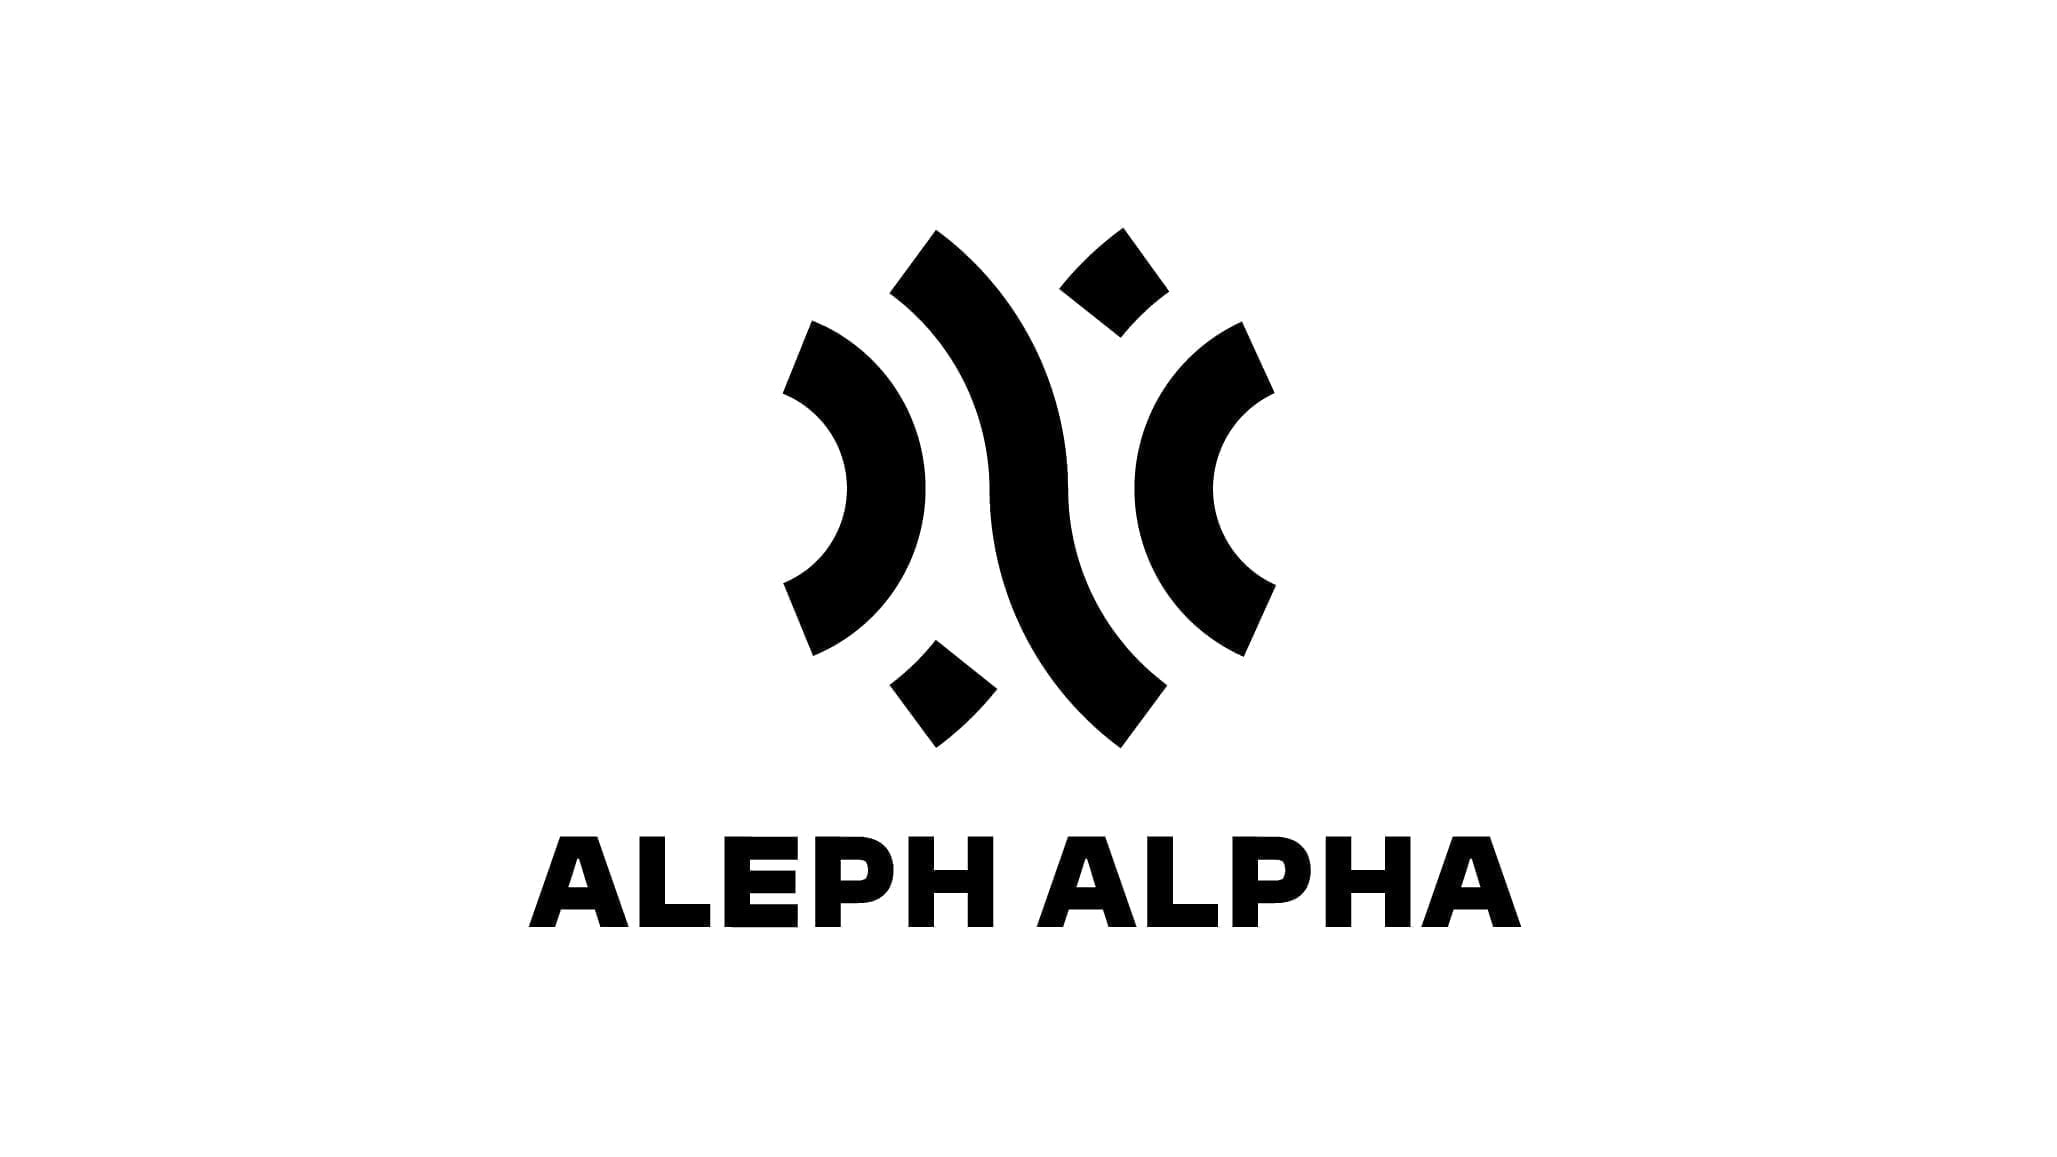 German AI startup Aleph Alpha's $500 million funding round faces scrutiny over transparency